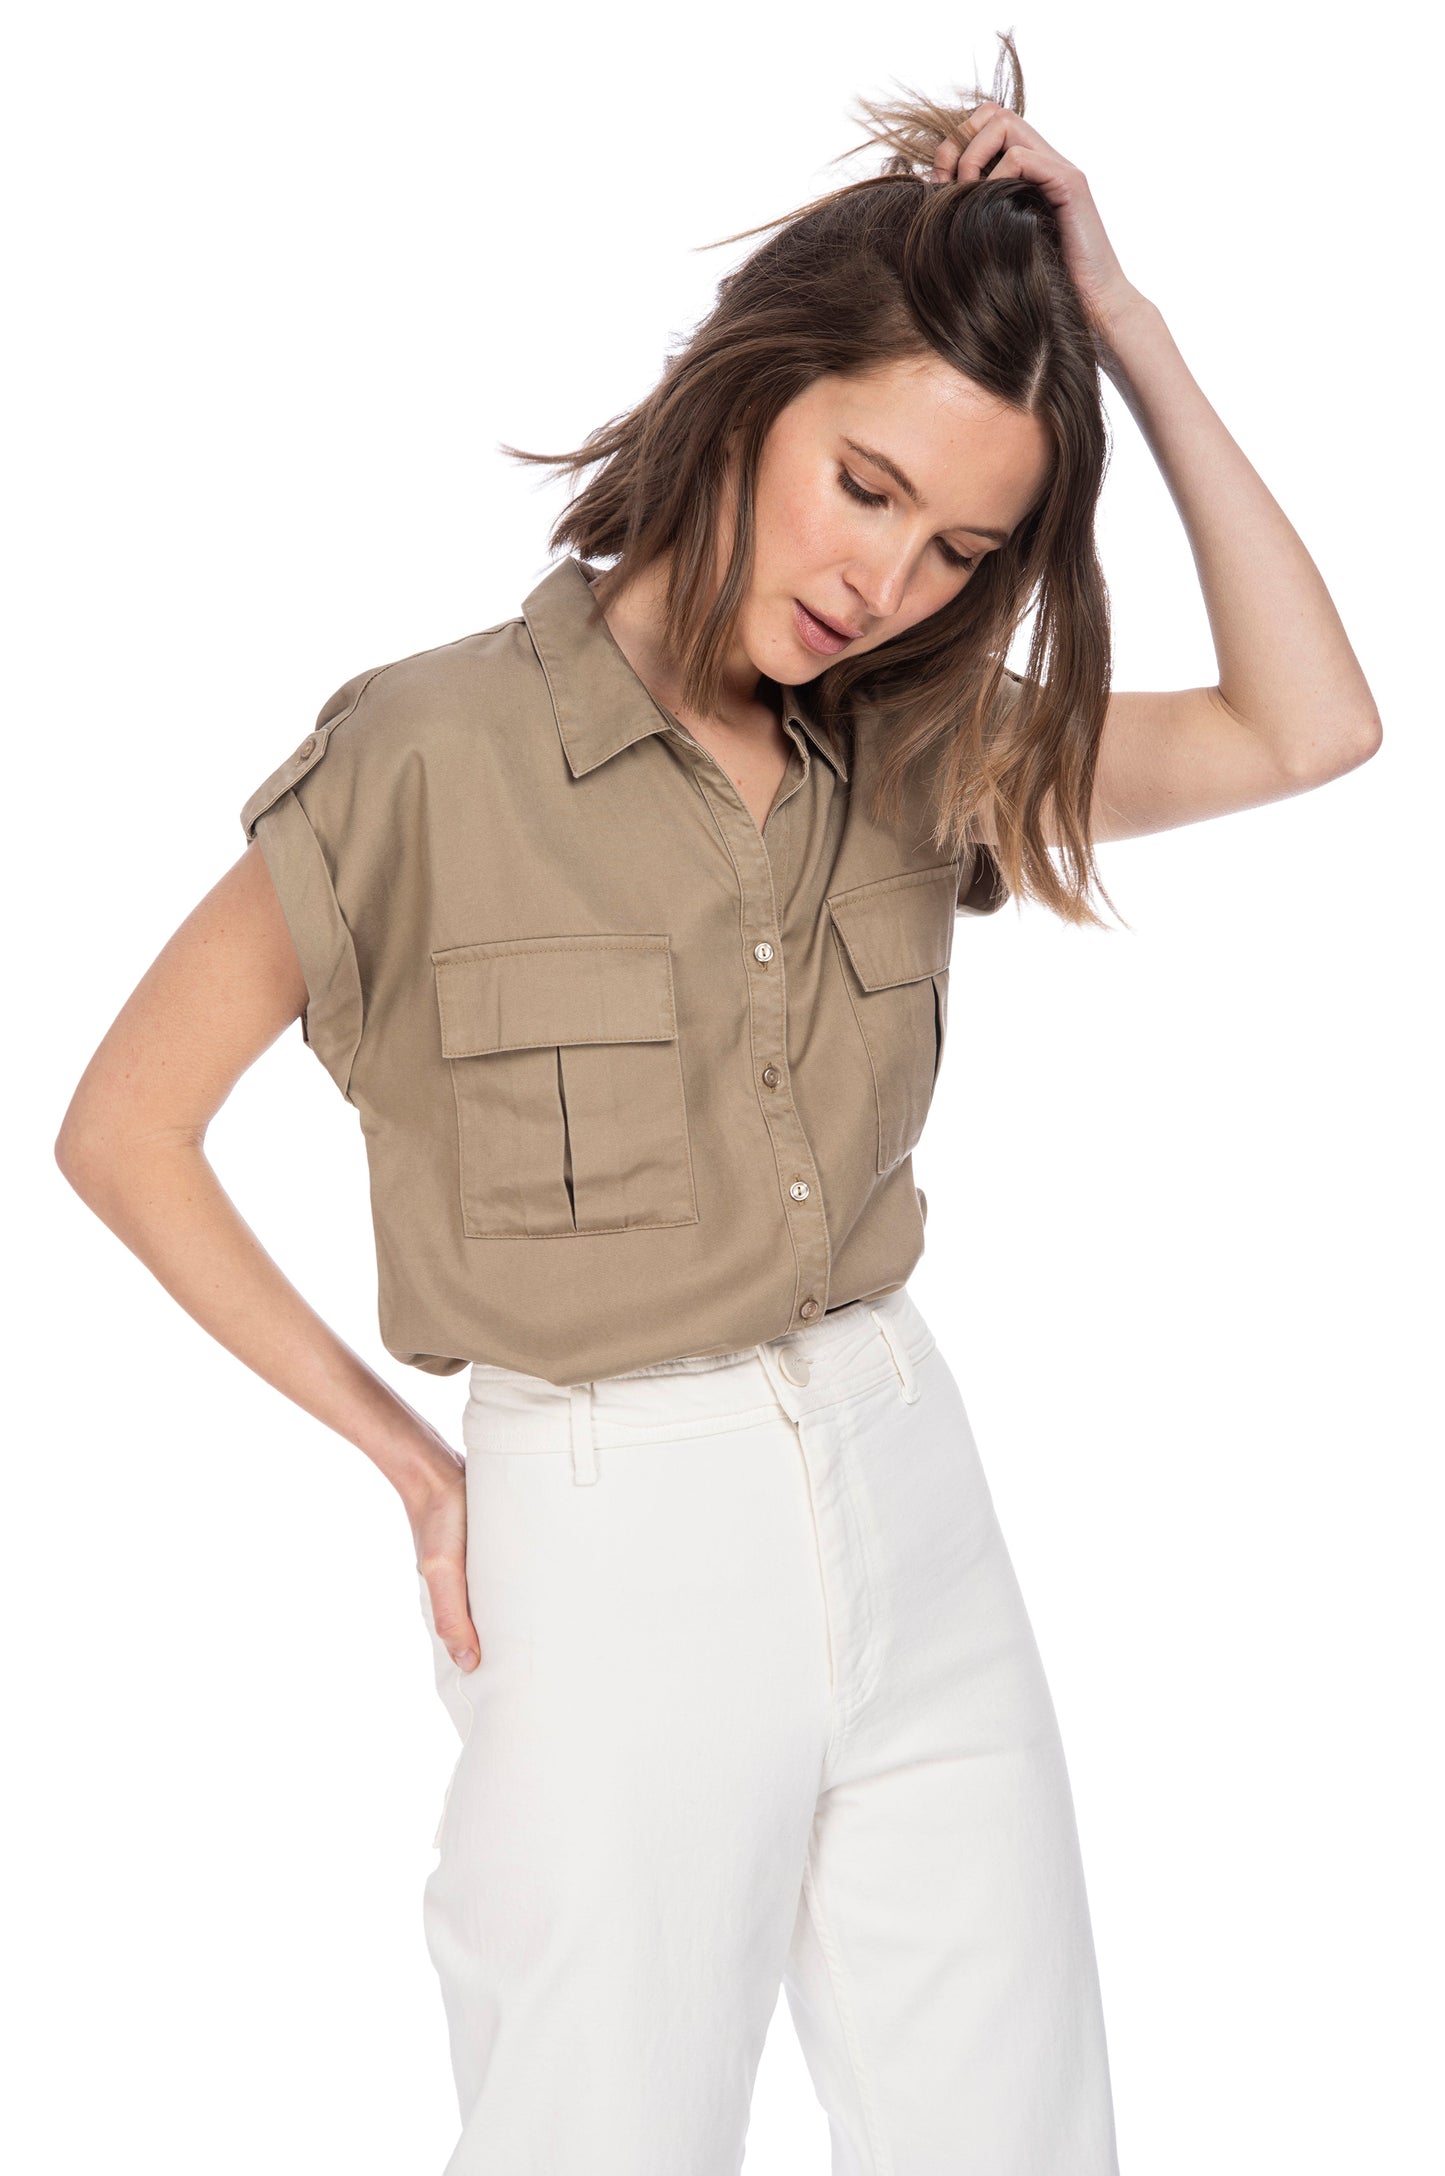 A contemplative young woman in a casual B Collection by Bobeau Tencel khaki utility button-up top and white pants, standing with one hand on her hip and the other running through her hair.